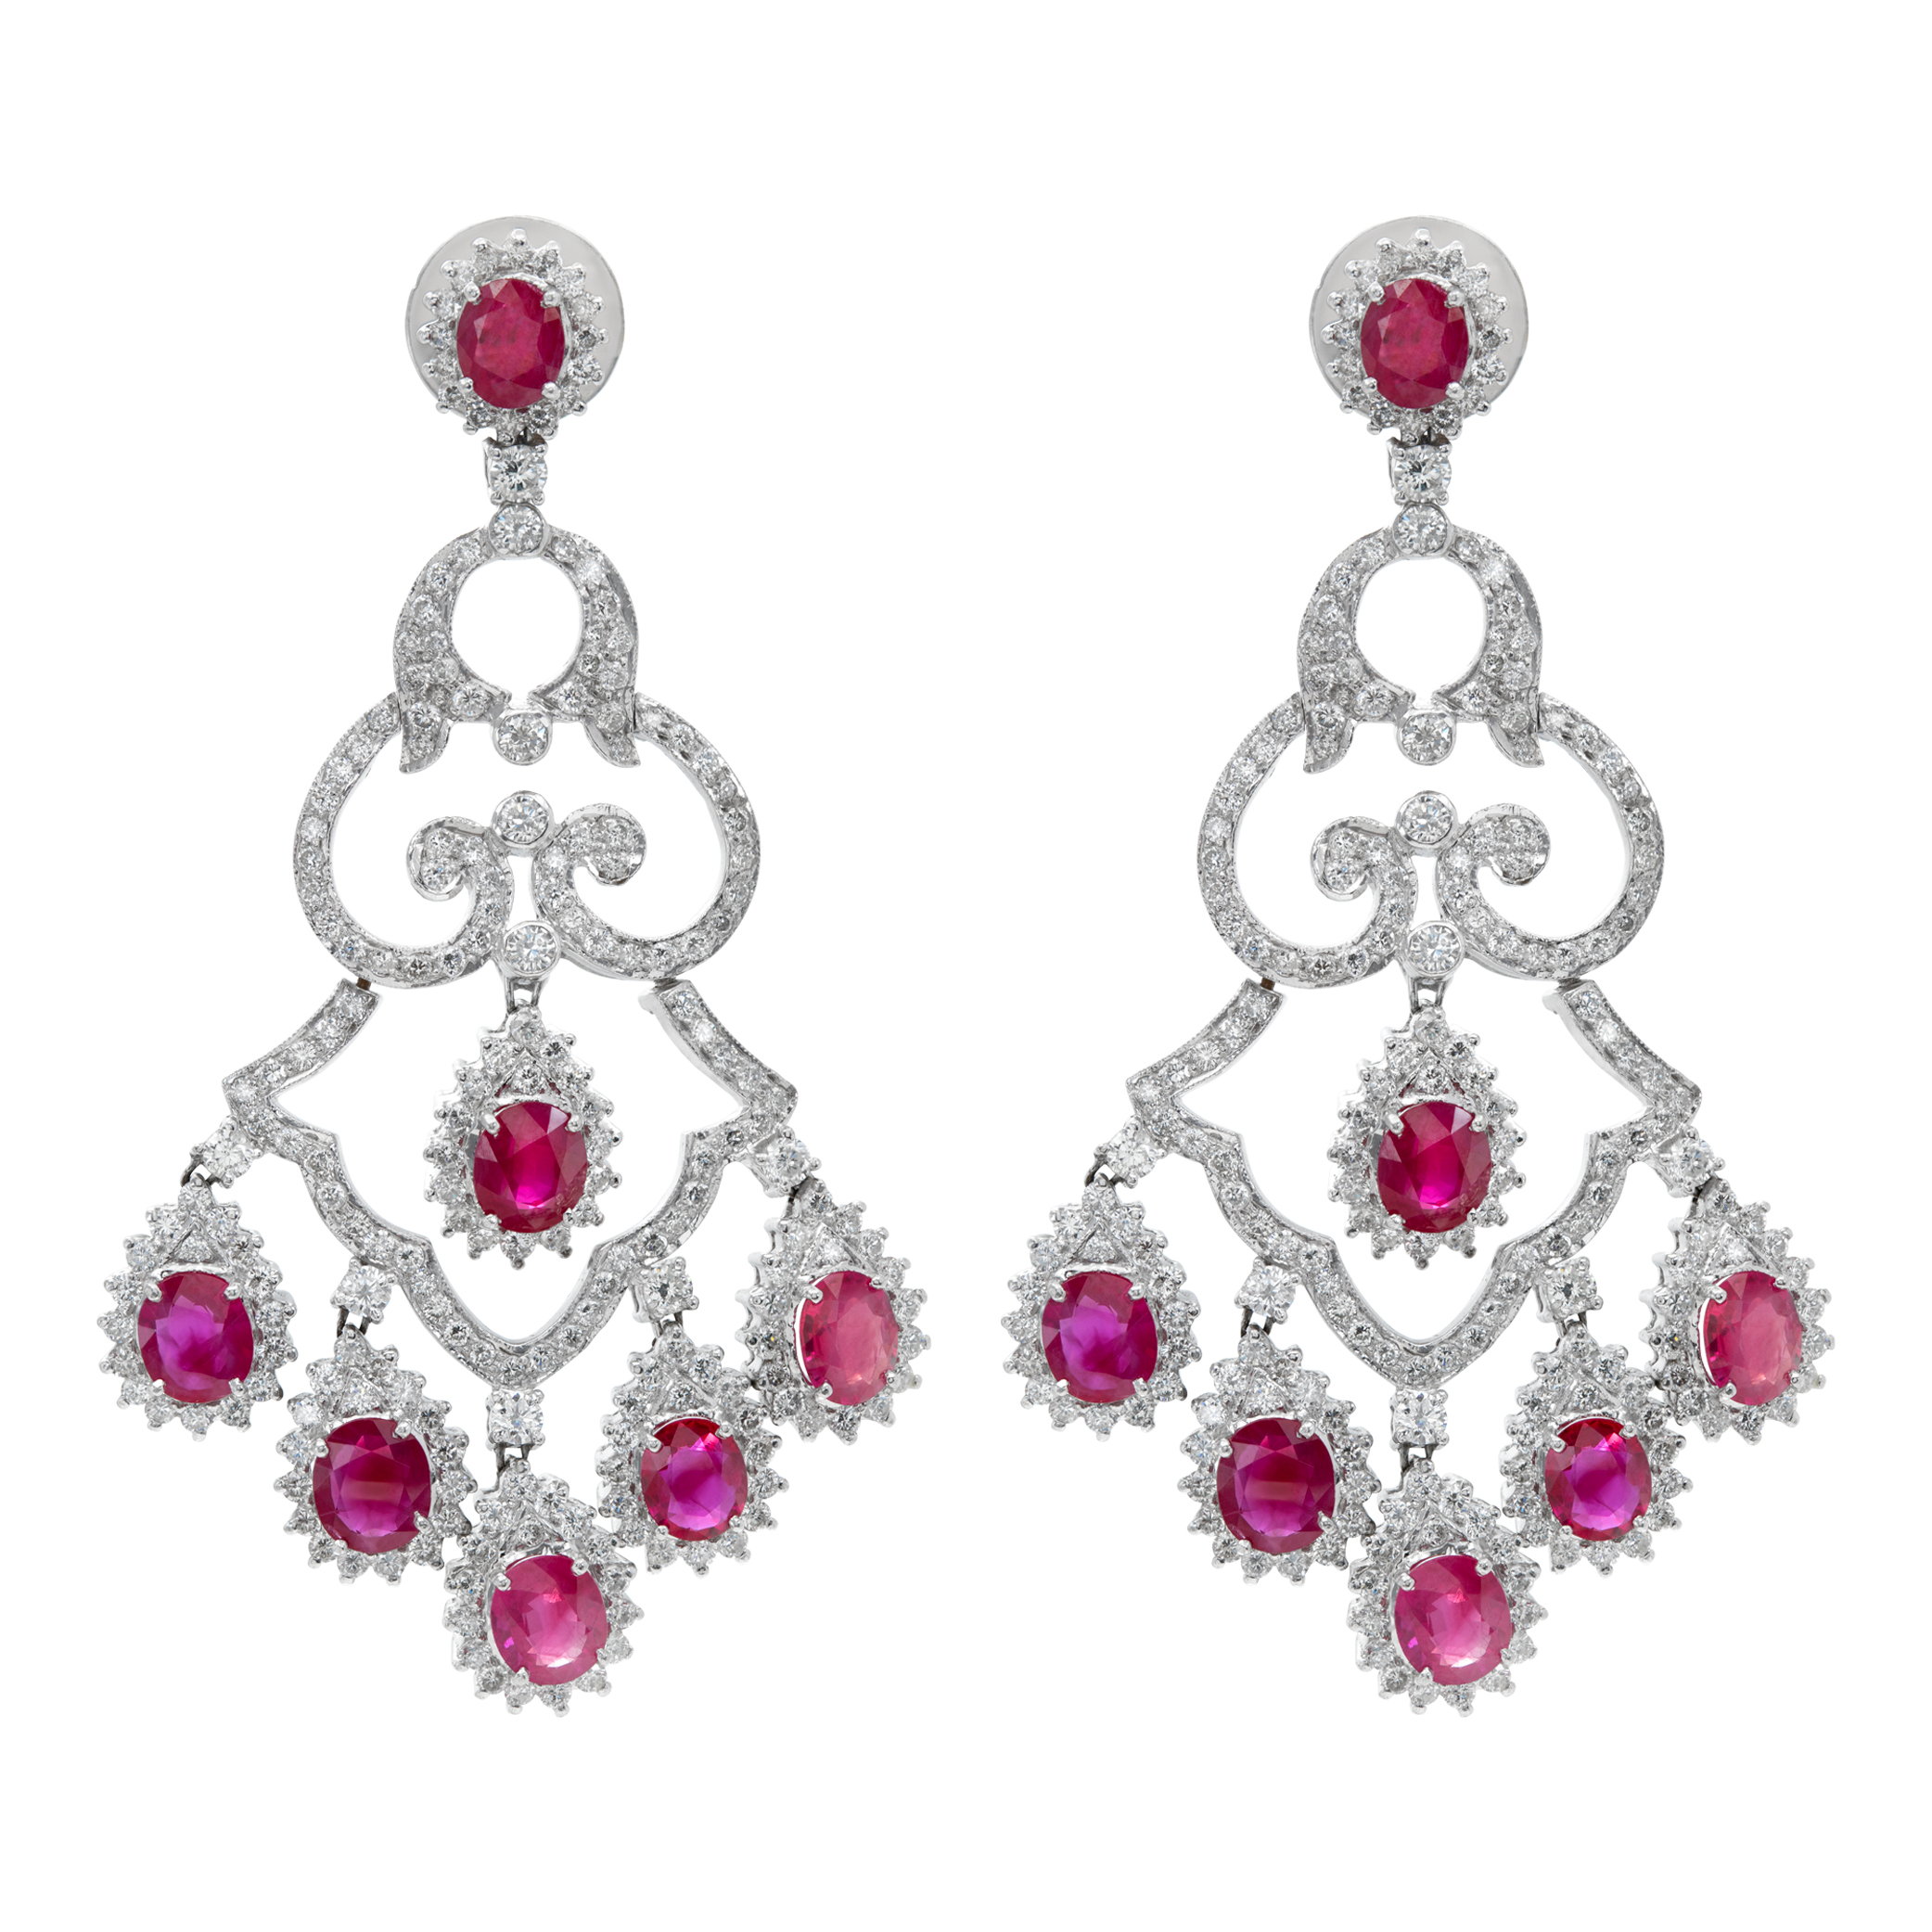 Ruby and Diamond Chandelier earrings in 18k white gold. Ruby: 11.10 carats, Diamonds: 6.30 carats